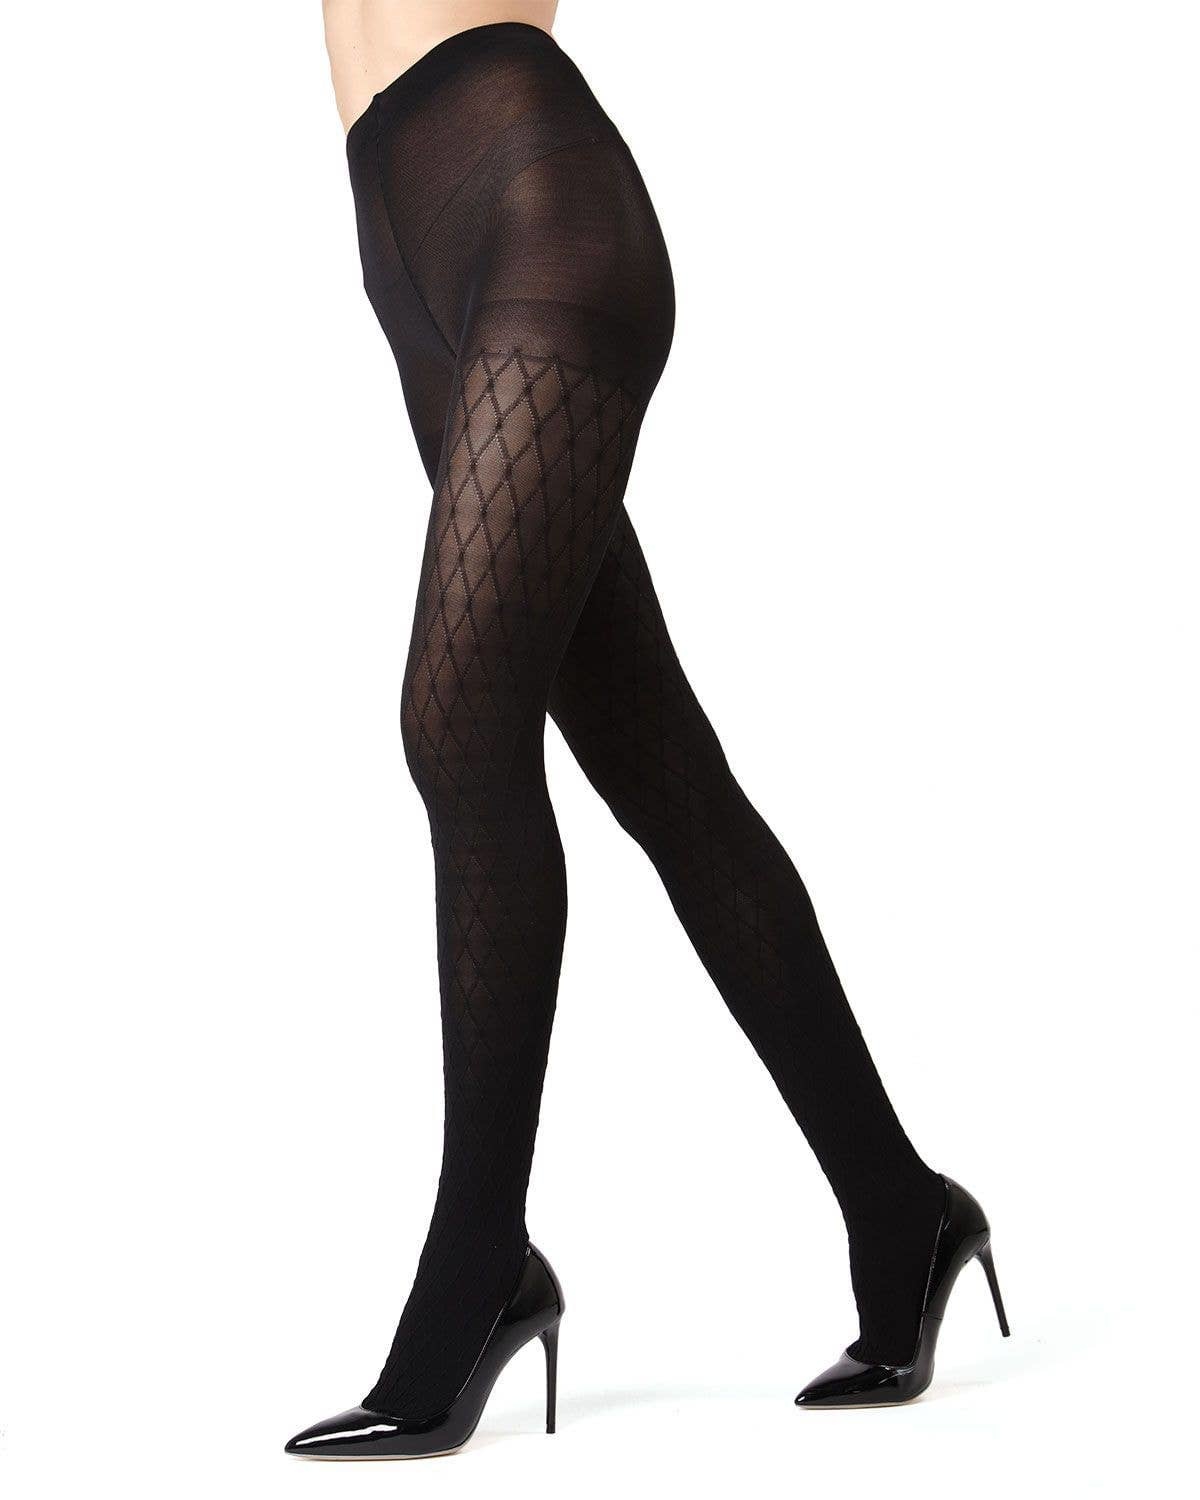 Extravagant Diamond Tights Black Opaque - For The Love of Shoes NY